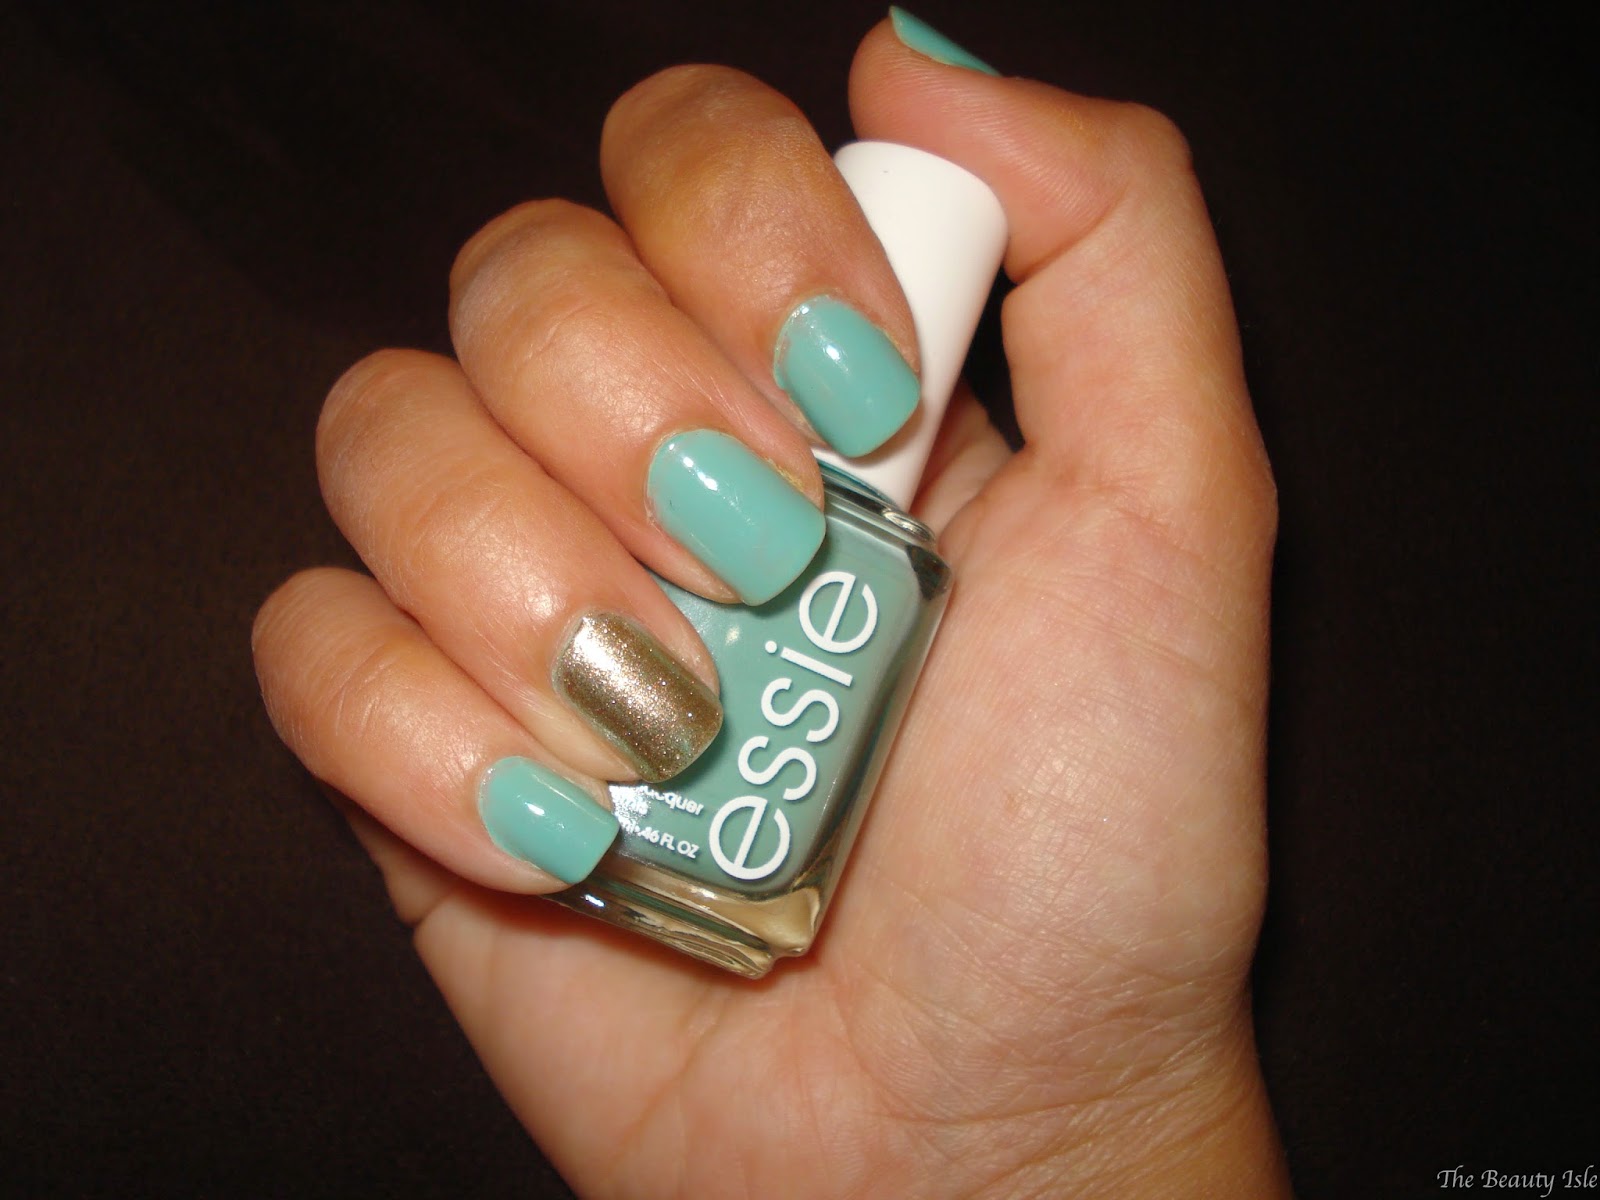 2. Essie Nail Polish in "Turquoise & Caicos" - wide 4